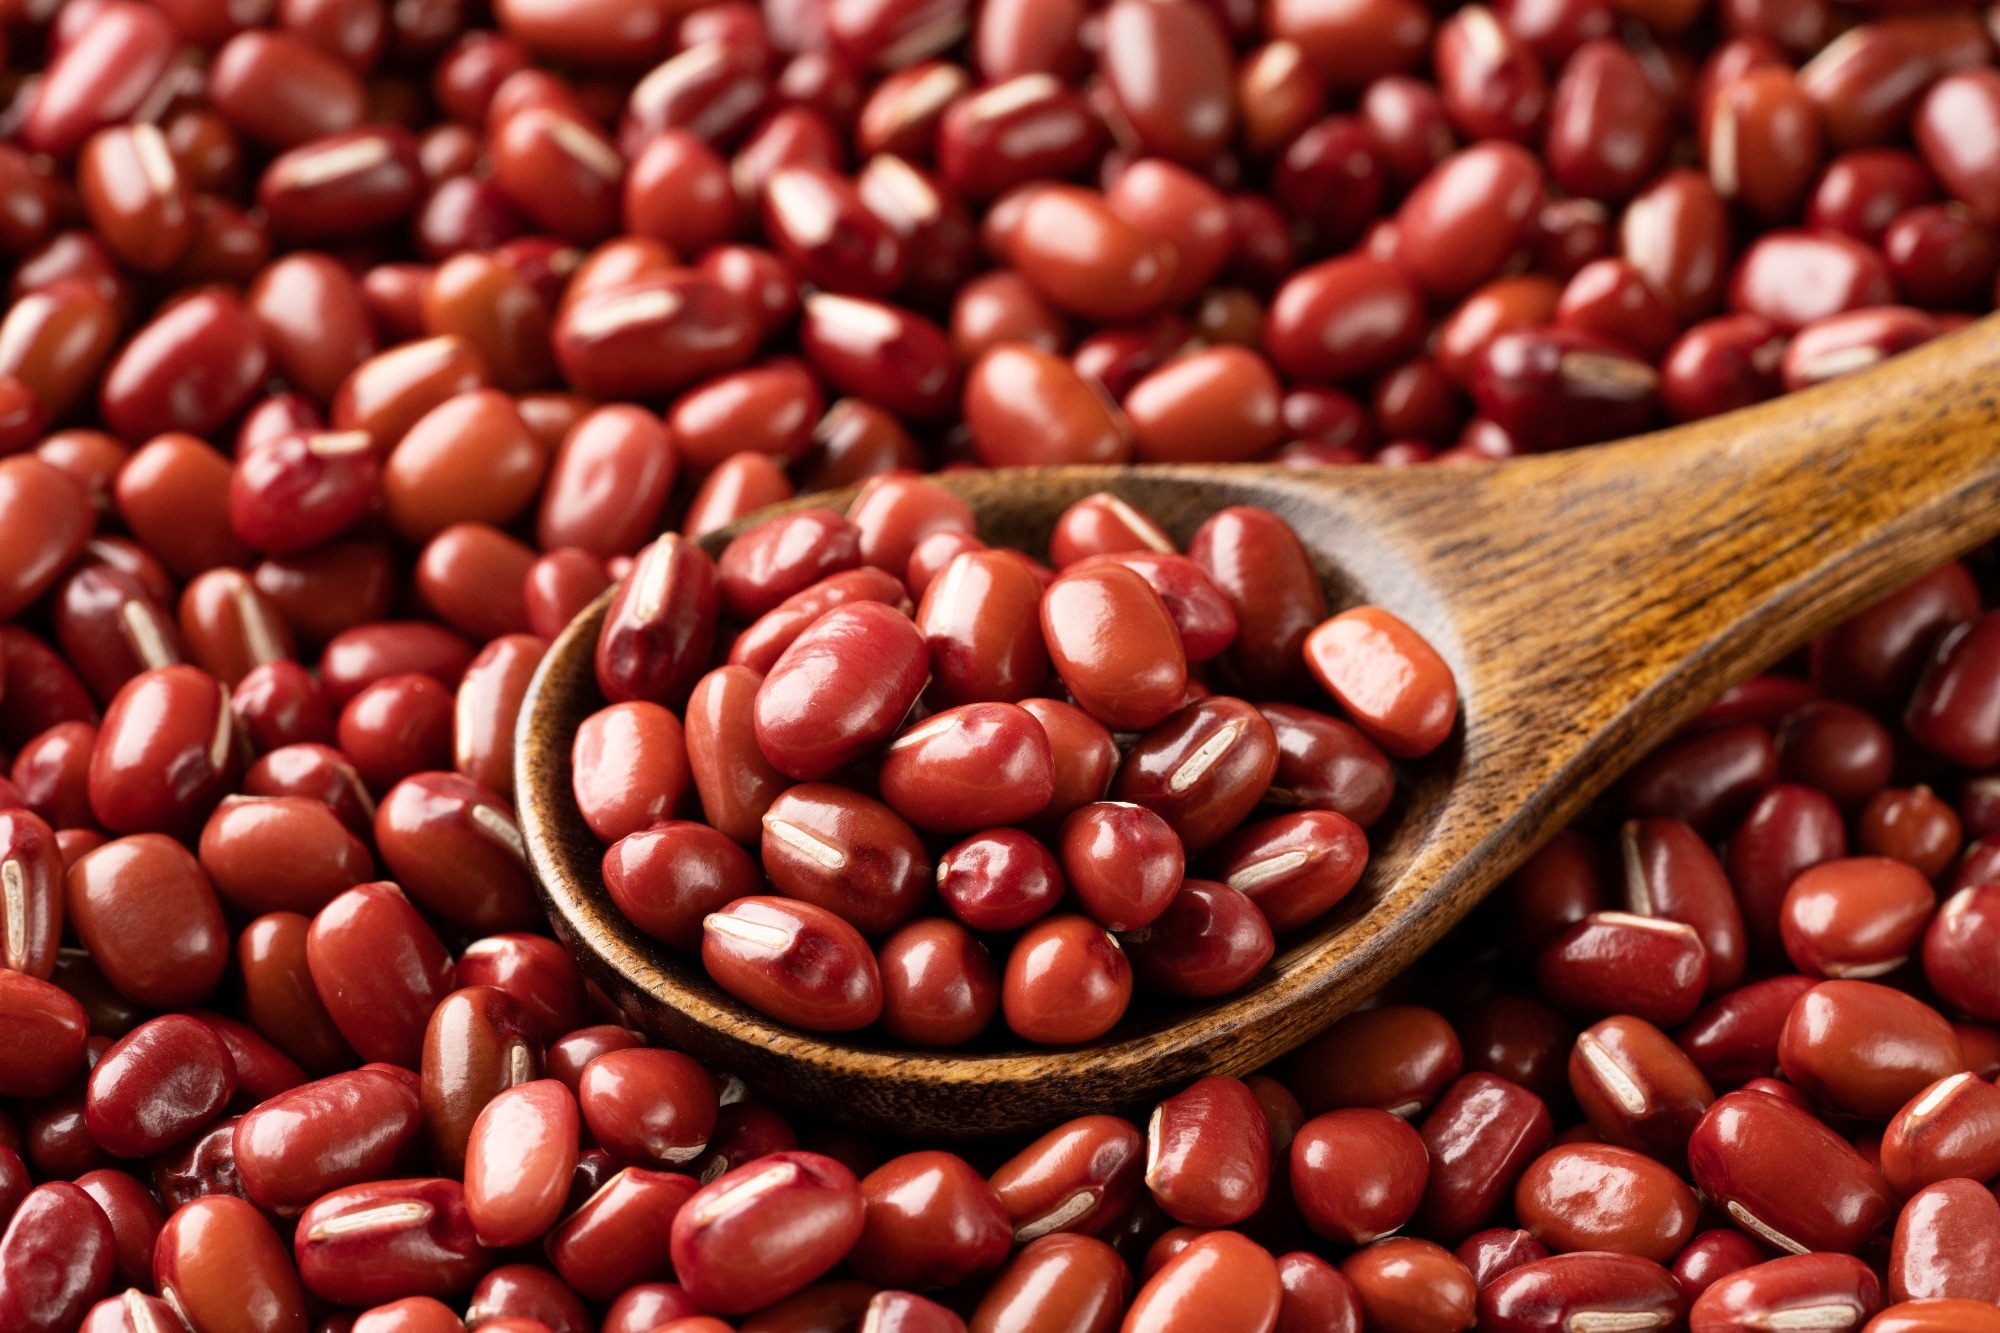 Study: The potential of adzuki bean (Vigna angleis) and its bioactive compounds in the treatment of type 2 diabetes and glucose metabolism: A narrative review. Image source: Hanasaki/Shutterstock.com